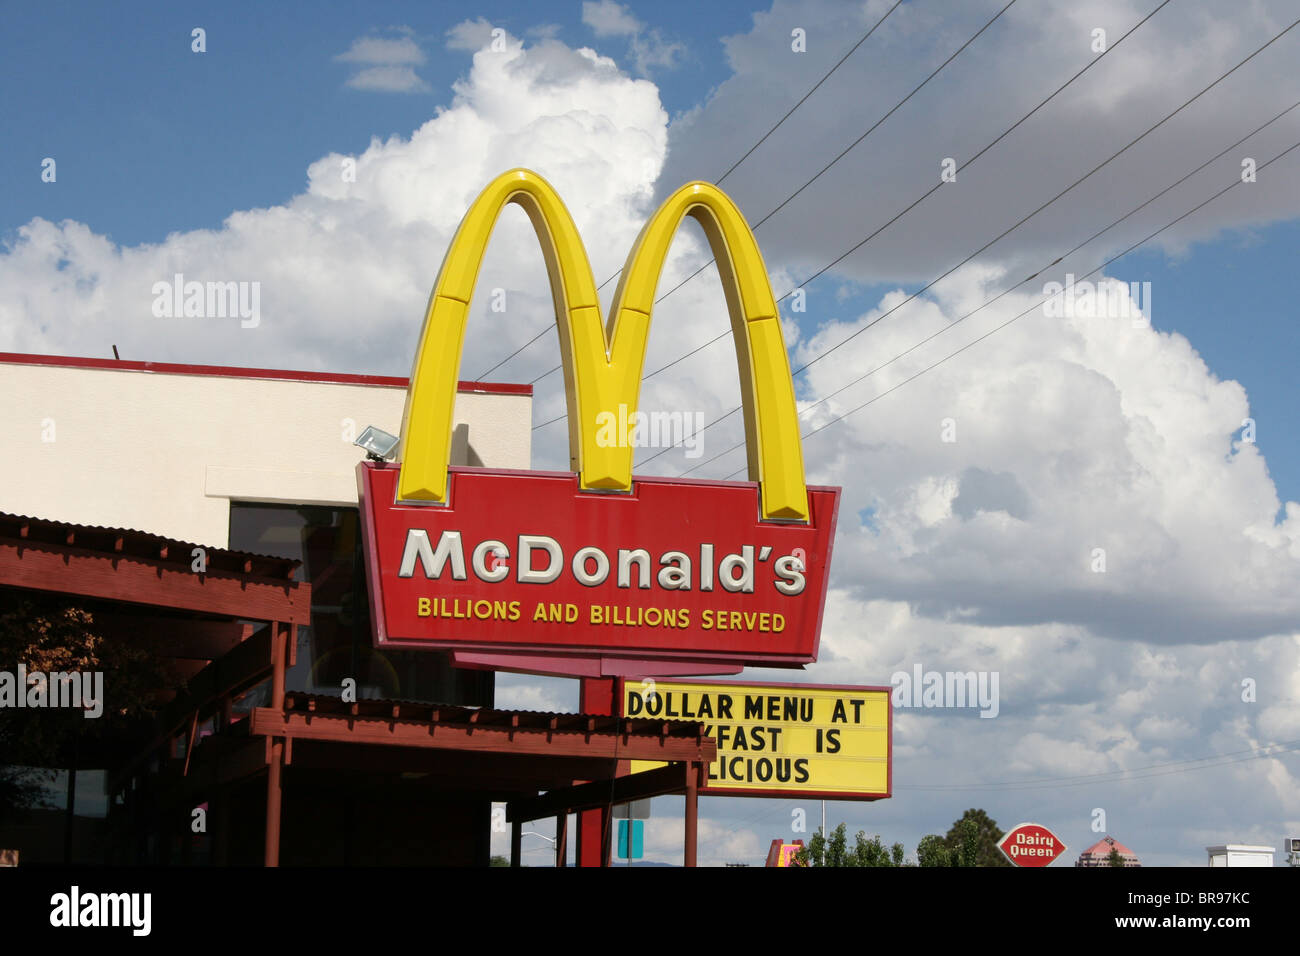 McDonald's restaurant sign in USA billions and billions served golden arches Stock Photo